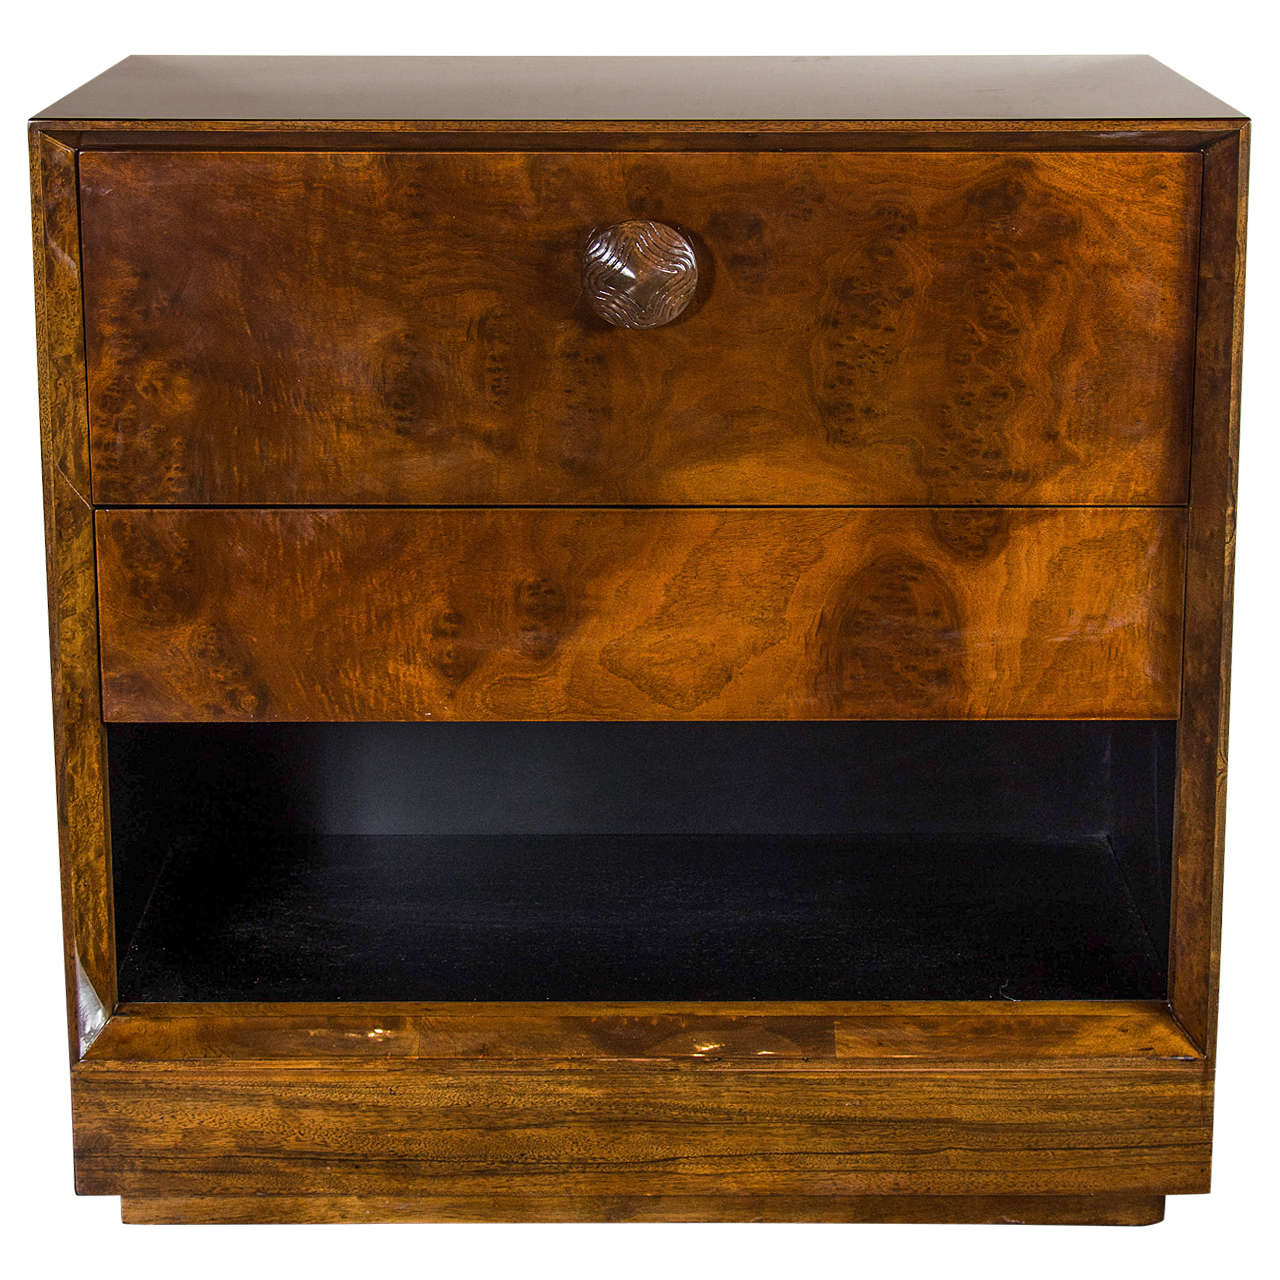 Art Deco Drop-Front Secretaire or Bar Cabinet by Gilbert Rohde in Paldao Wood